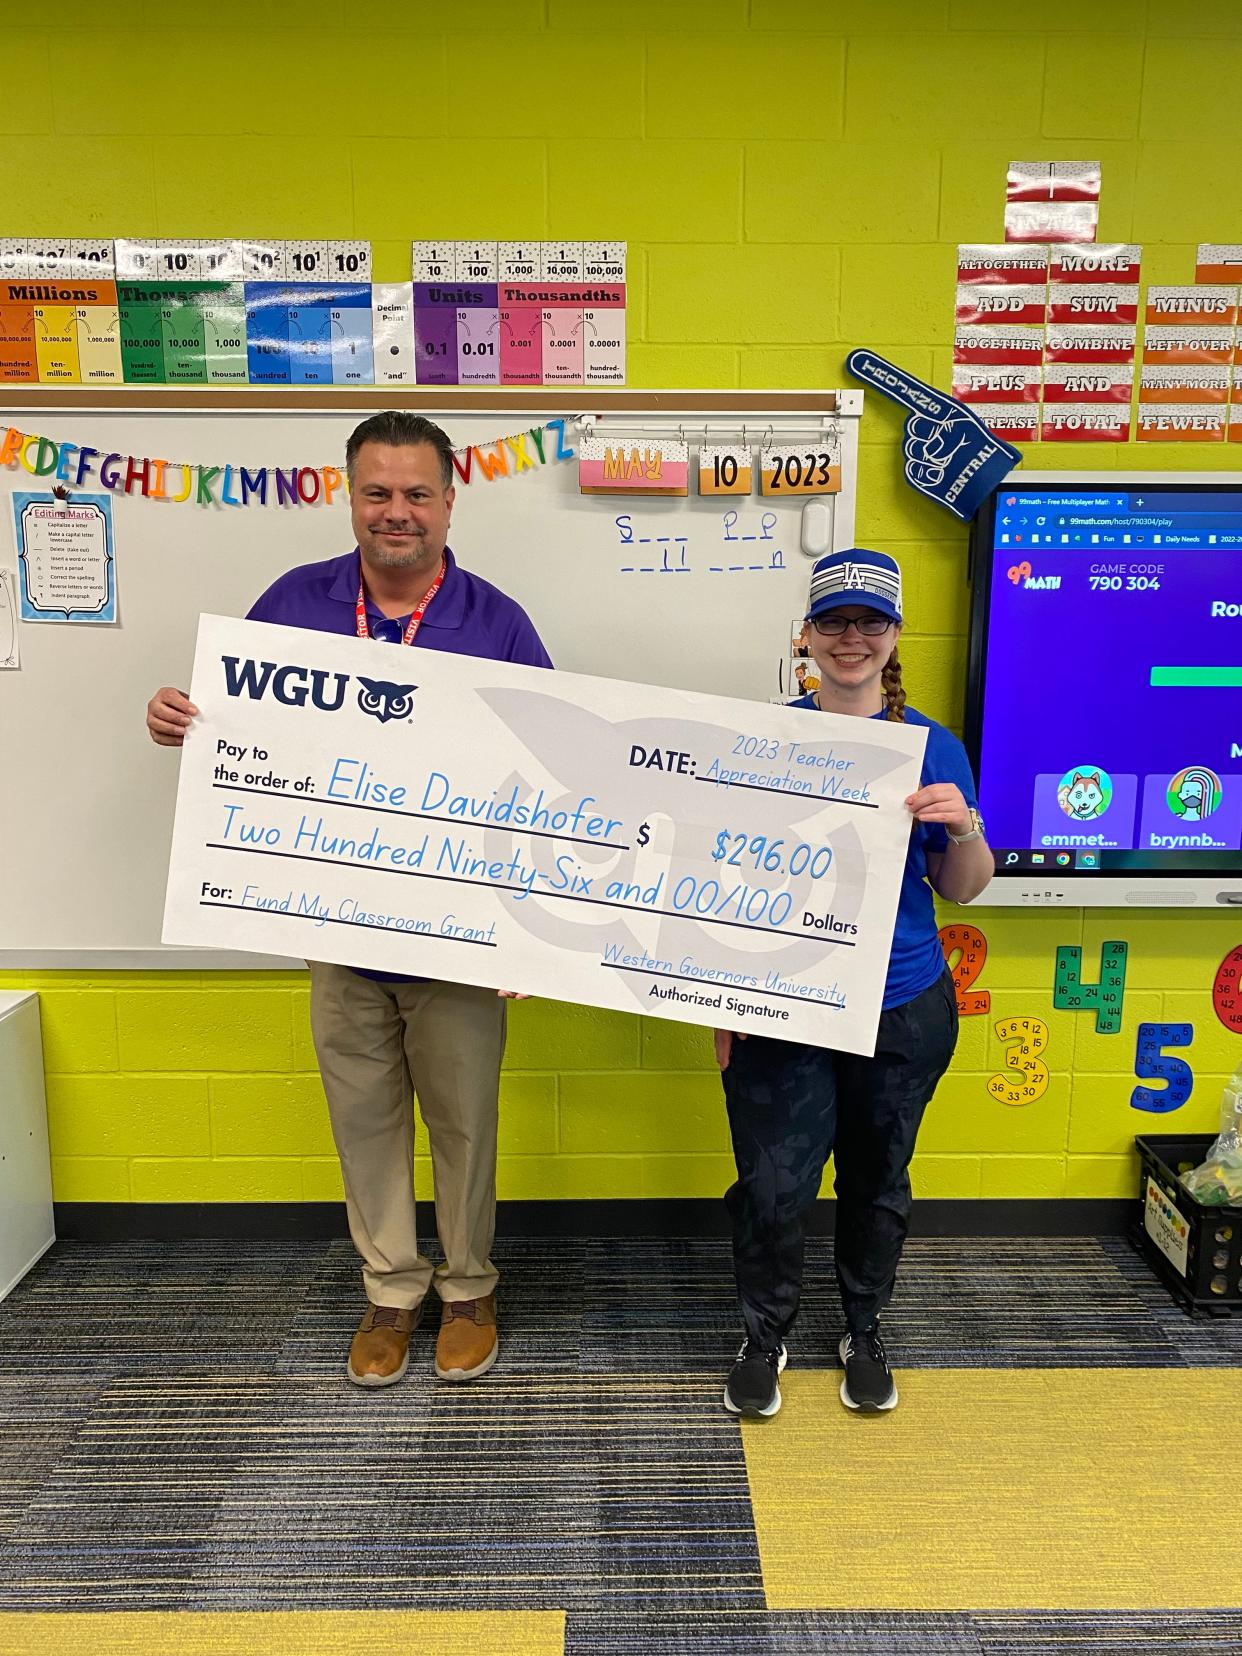 Elise Davidshofer, a fourth-grade teacher at Central Intermediate School in Washington (right) receives a $296 grant check from Western Governors University Strategic Partnerships Manager Dan Winkler.